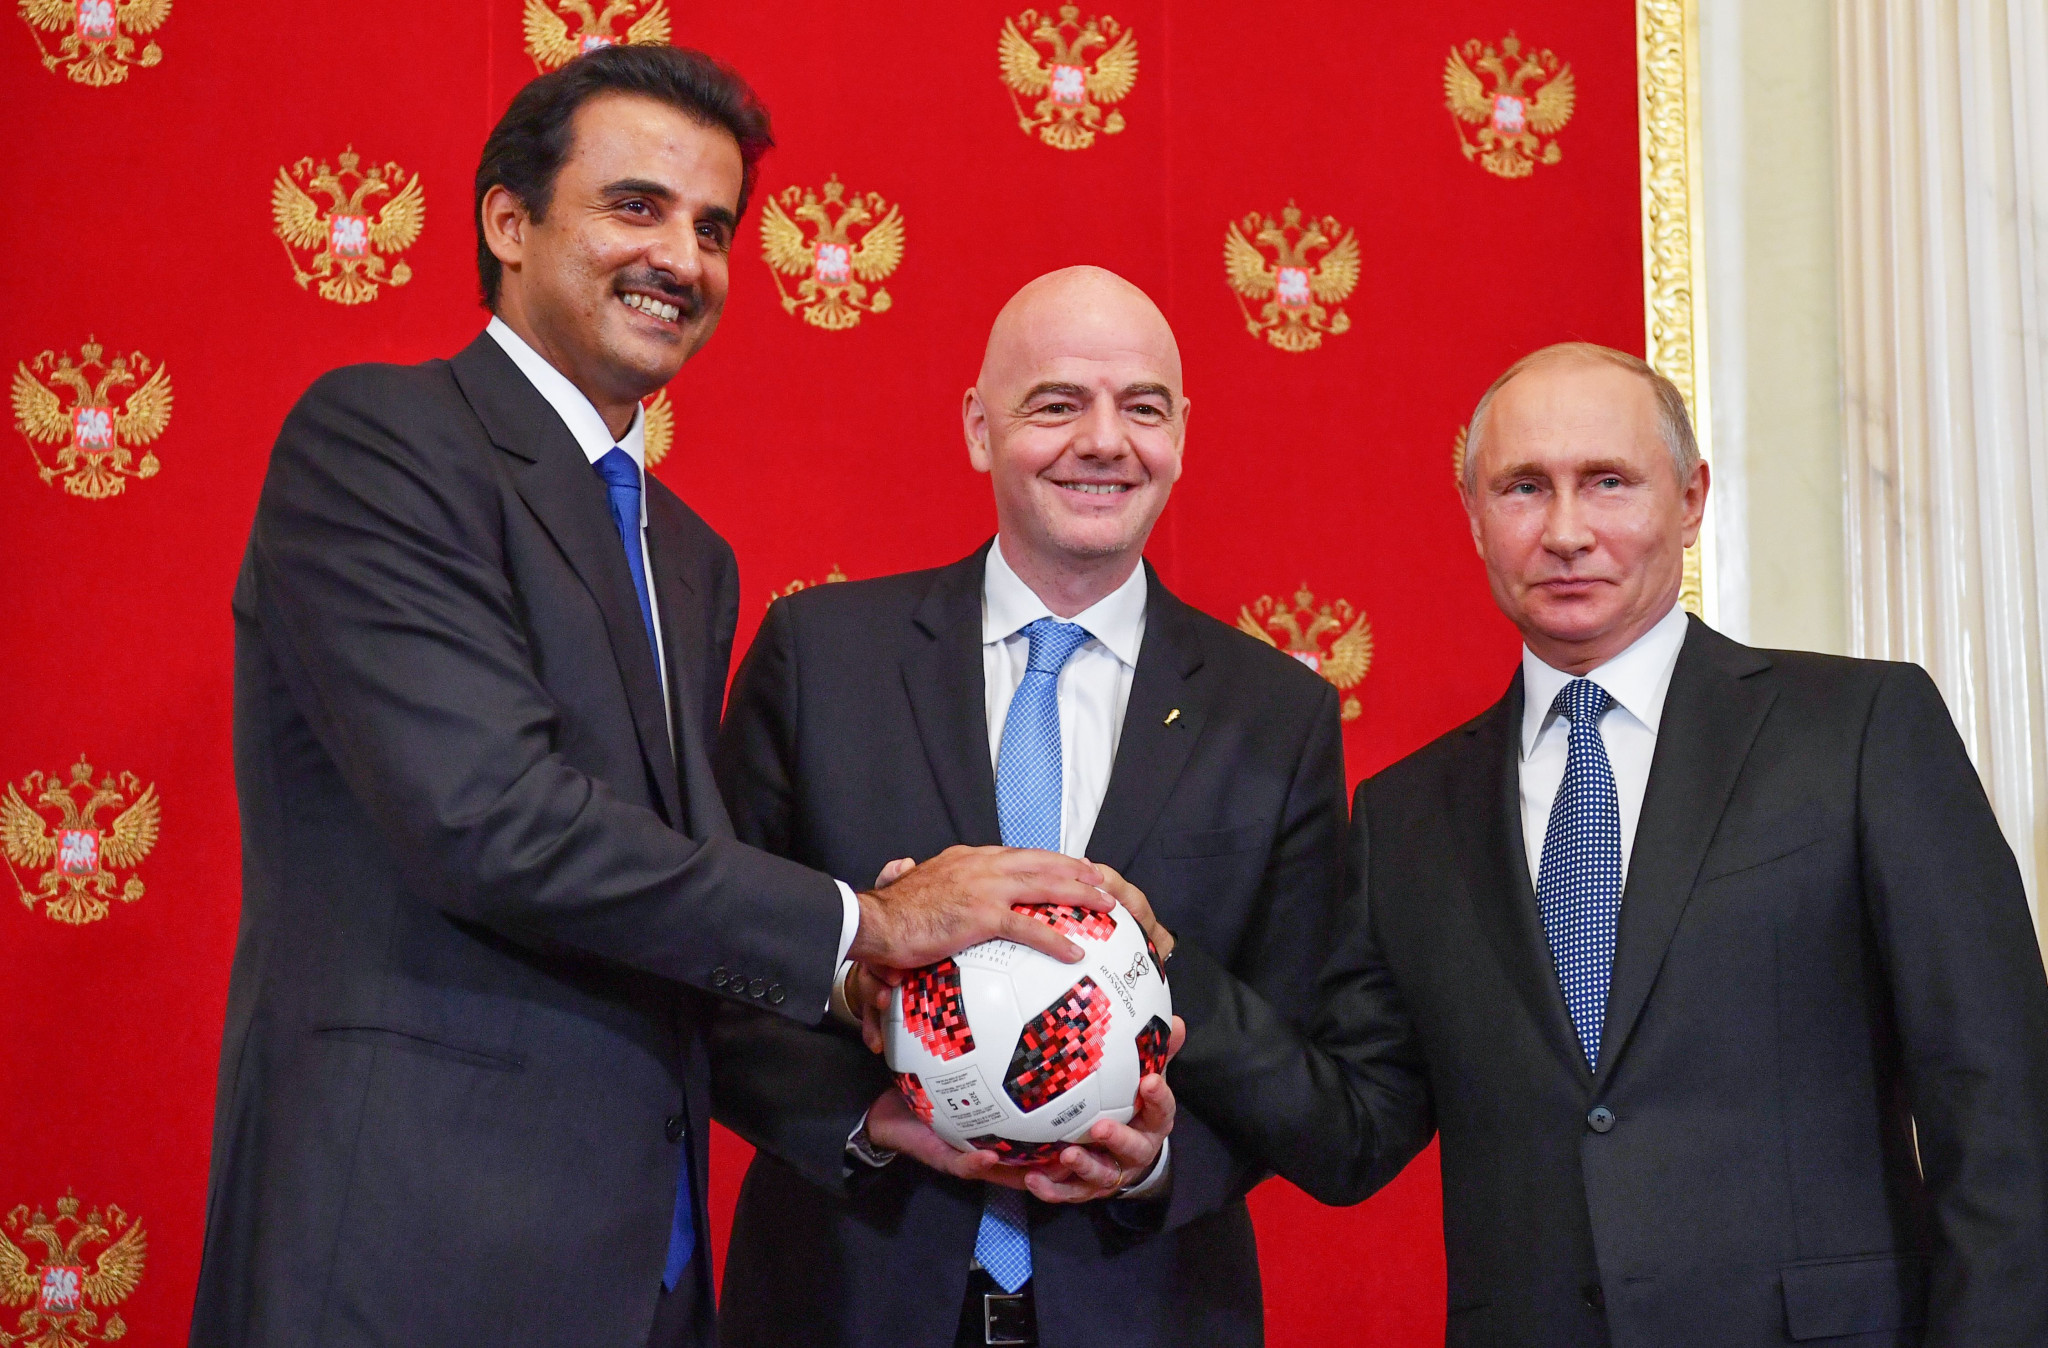 The FIFA World Cup mantle has been officially passed to Qatar ©Getty Images